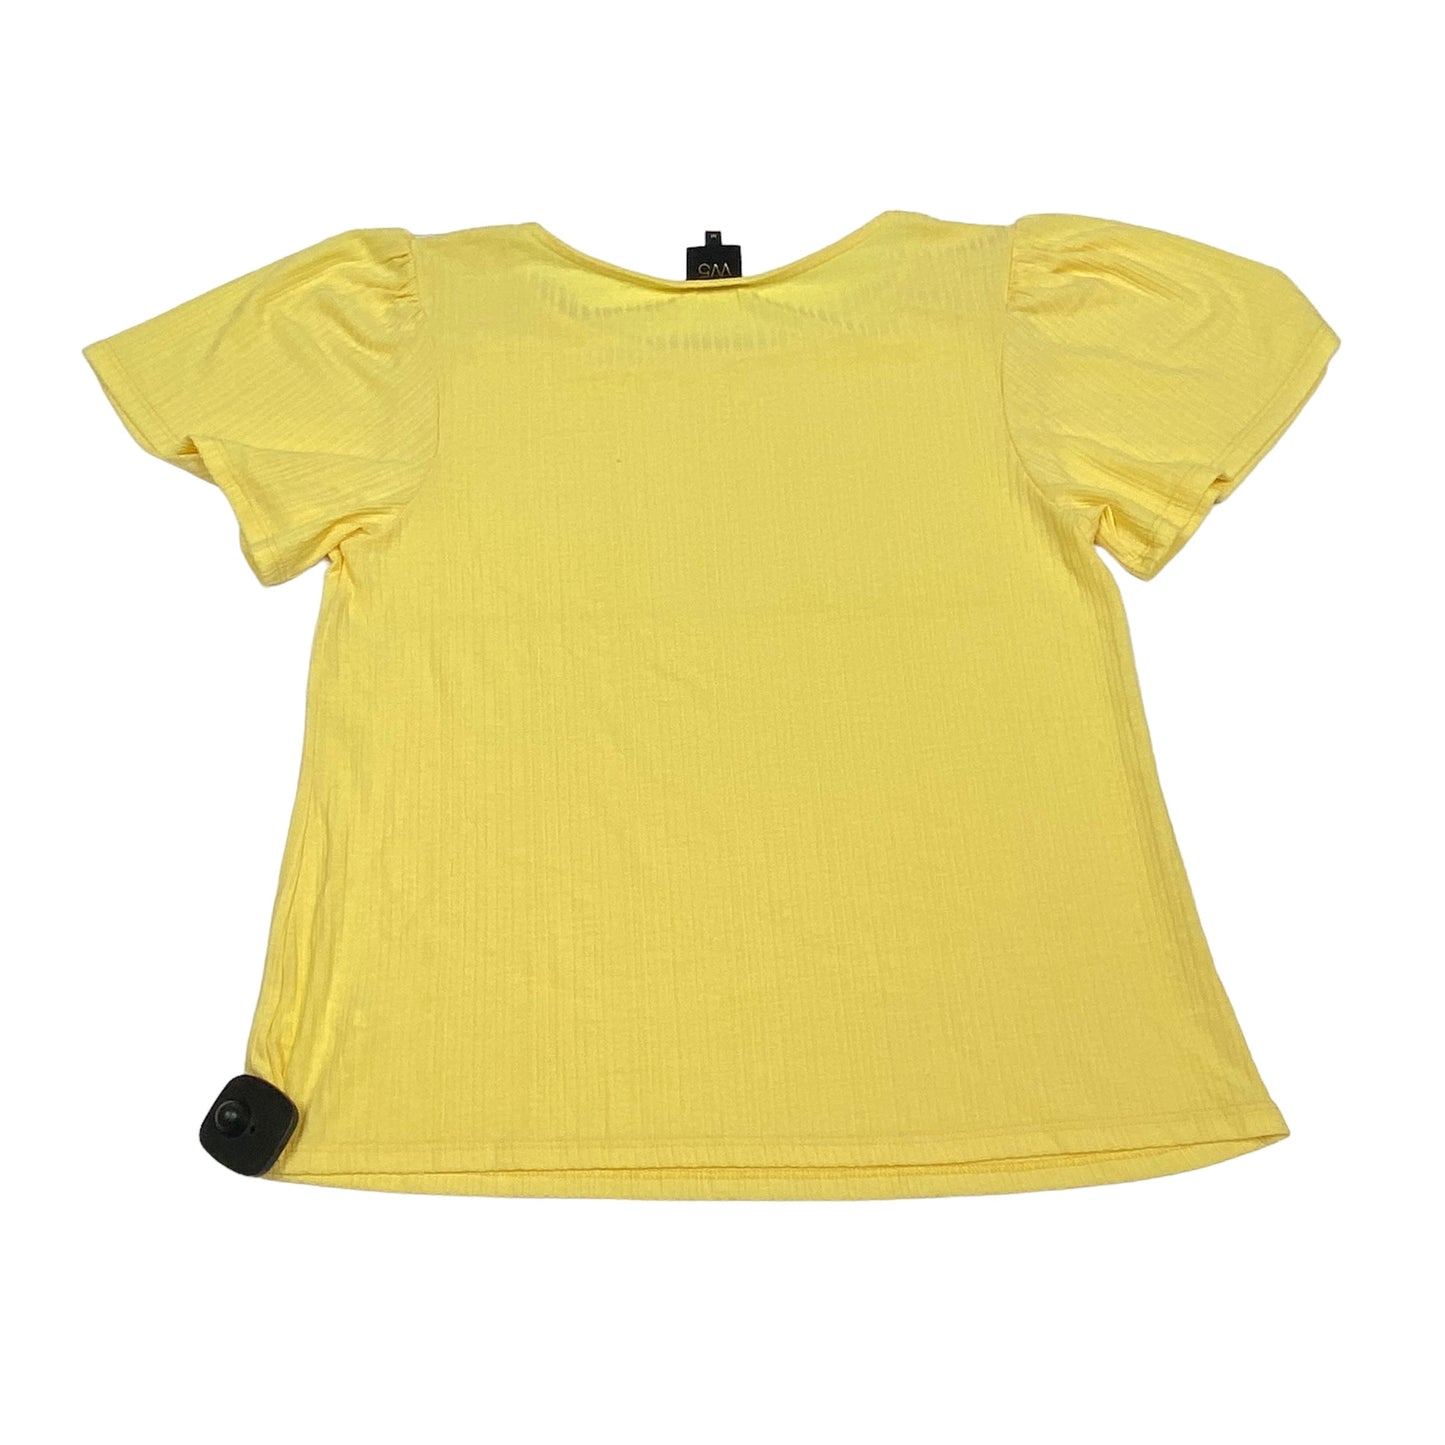 Yellow Top Short Sleeve W5, Size M